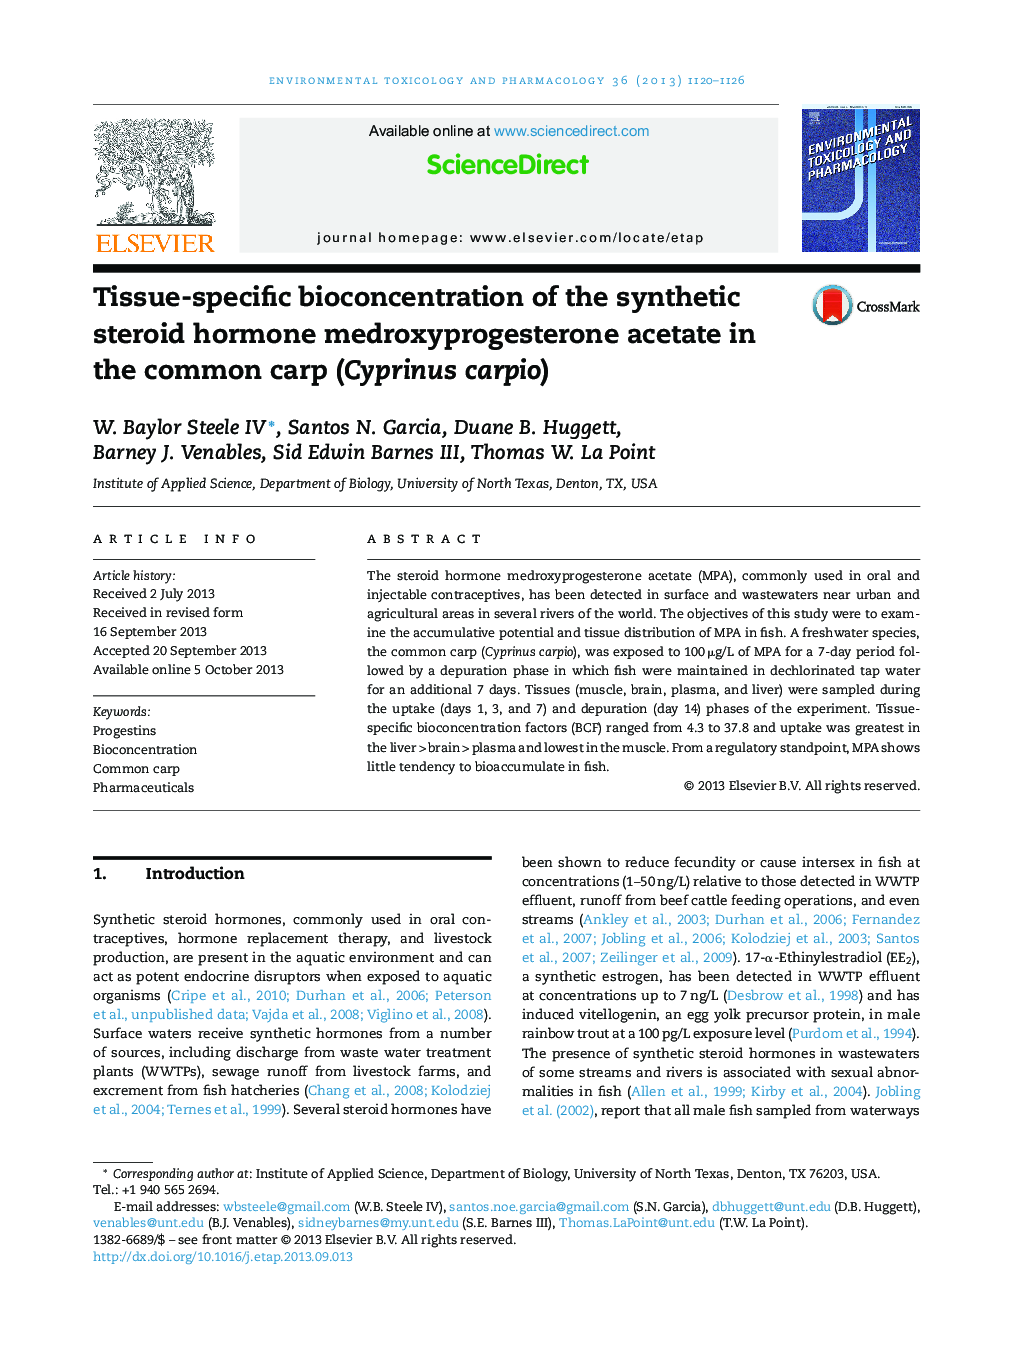 Tissue-specific bioconcentration of the synthetic steroid hormone medroxyprogesterone acetate in the common carp (Cyprinus carpio)